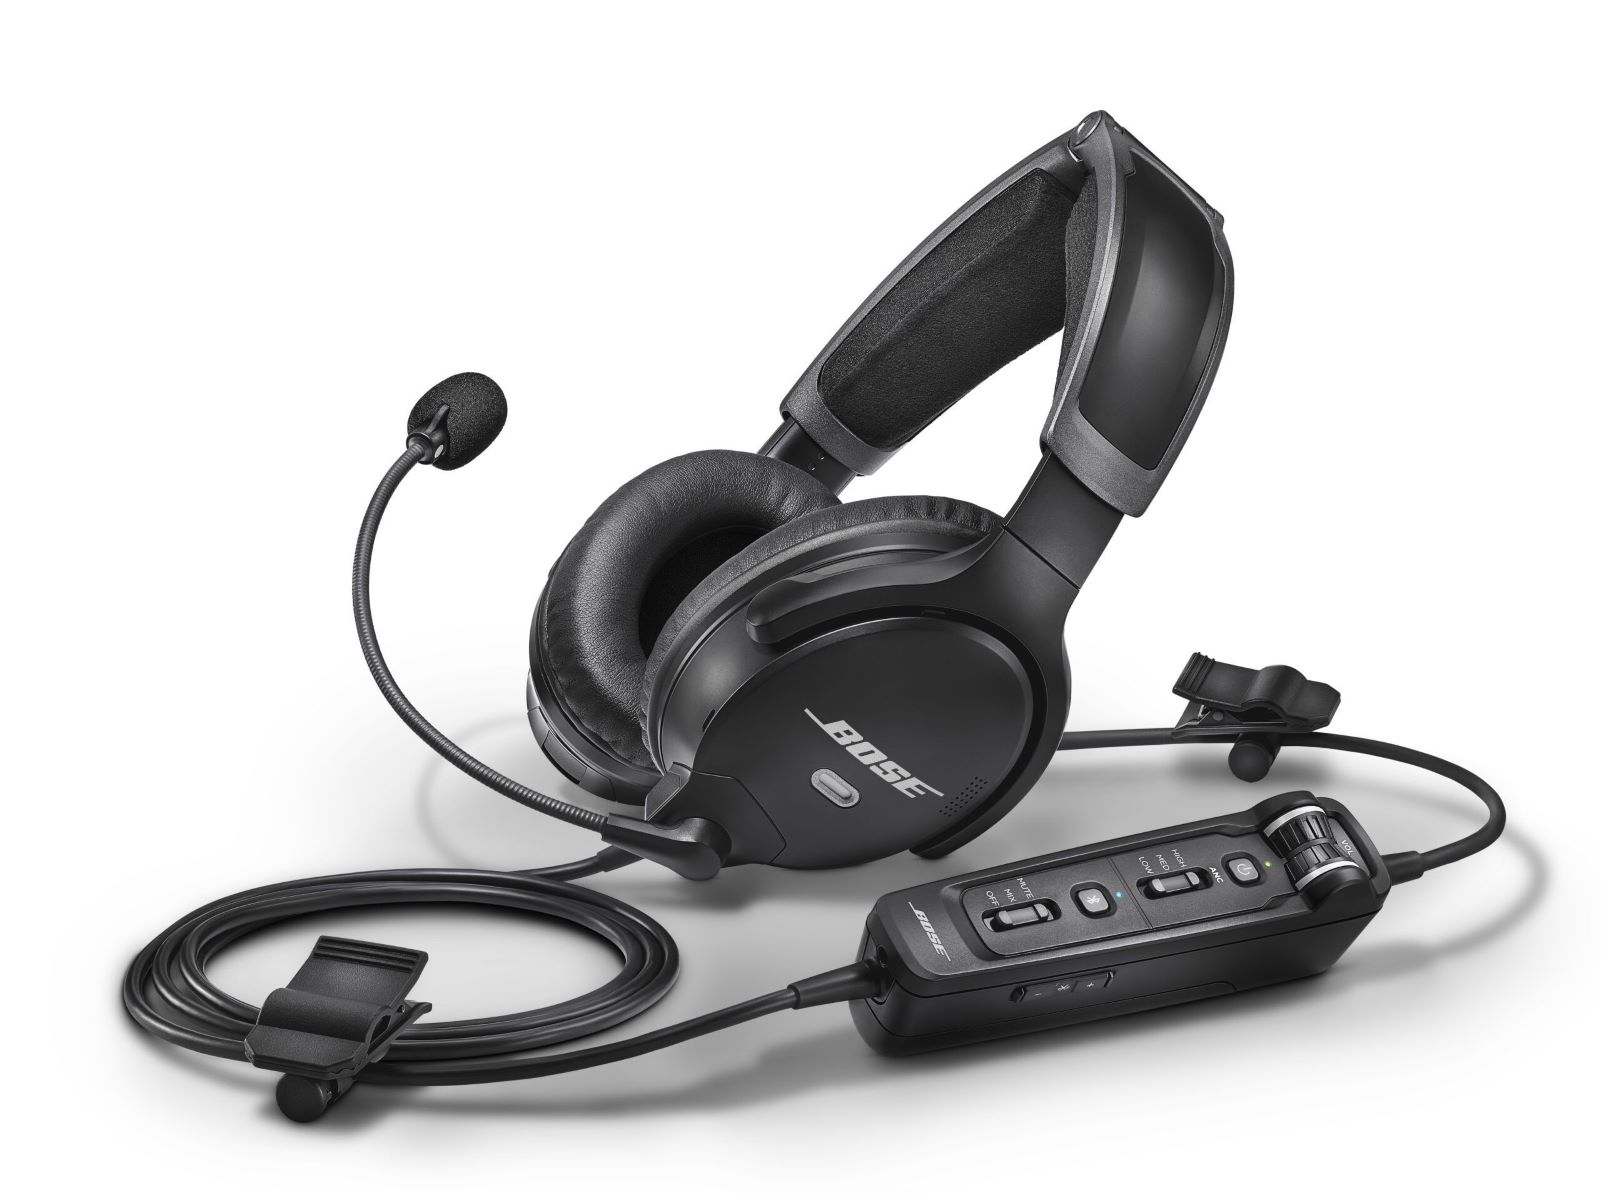 resetting-your-bose-headset-step-by-step-instructions